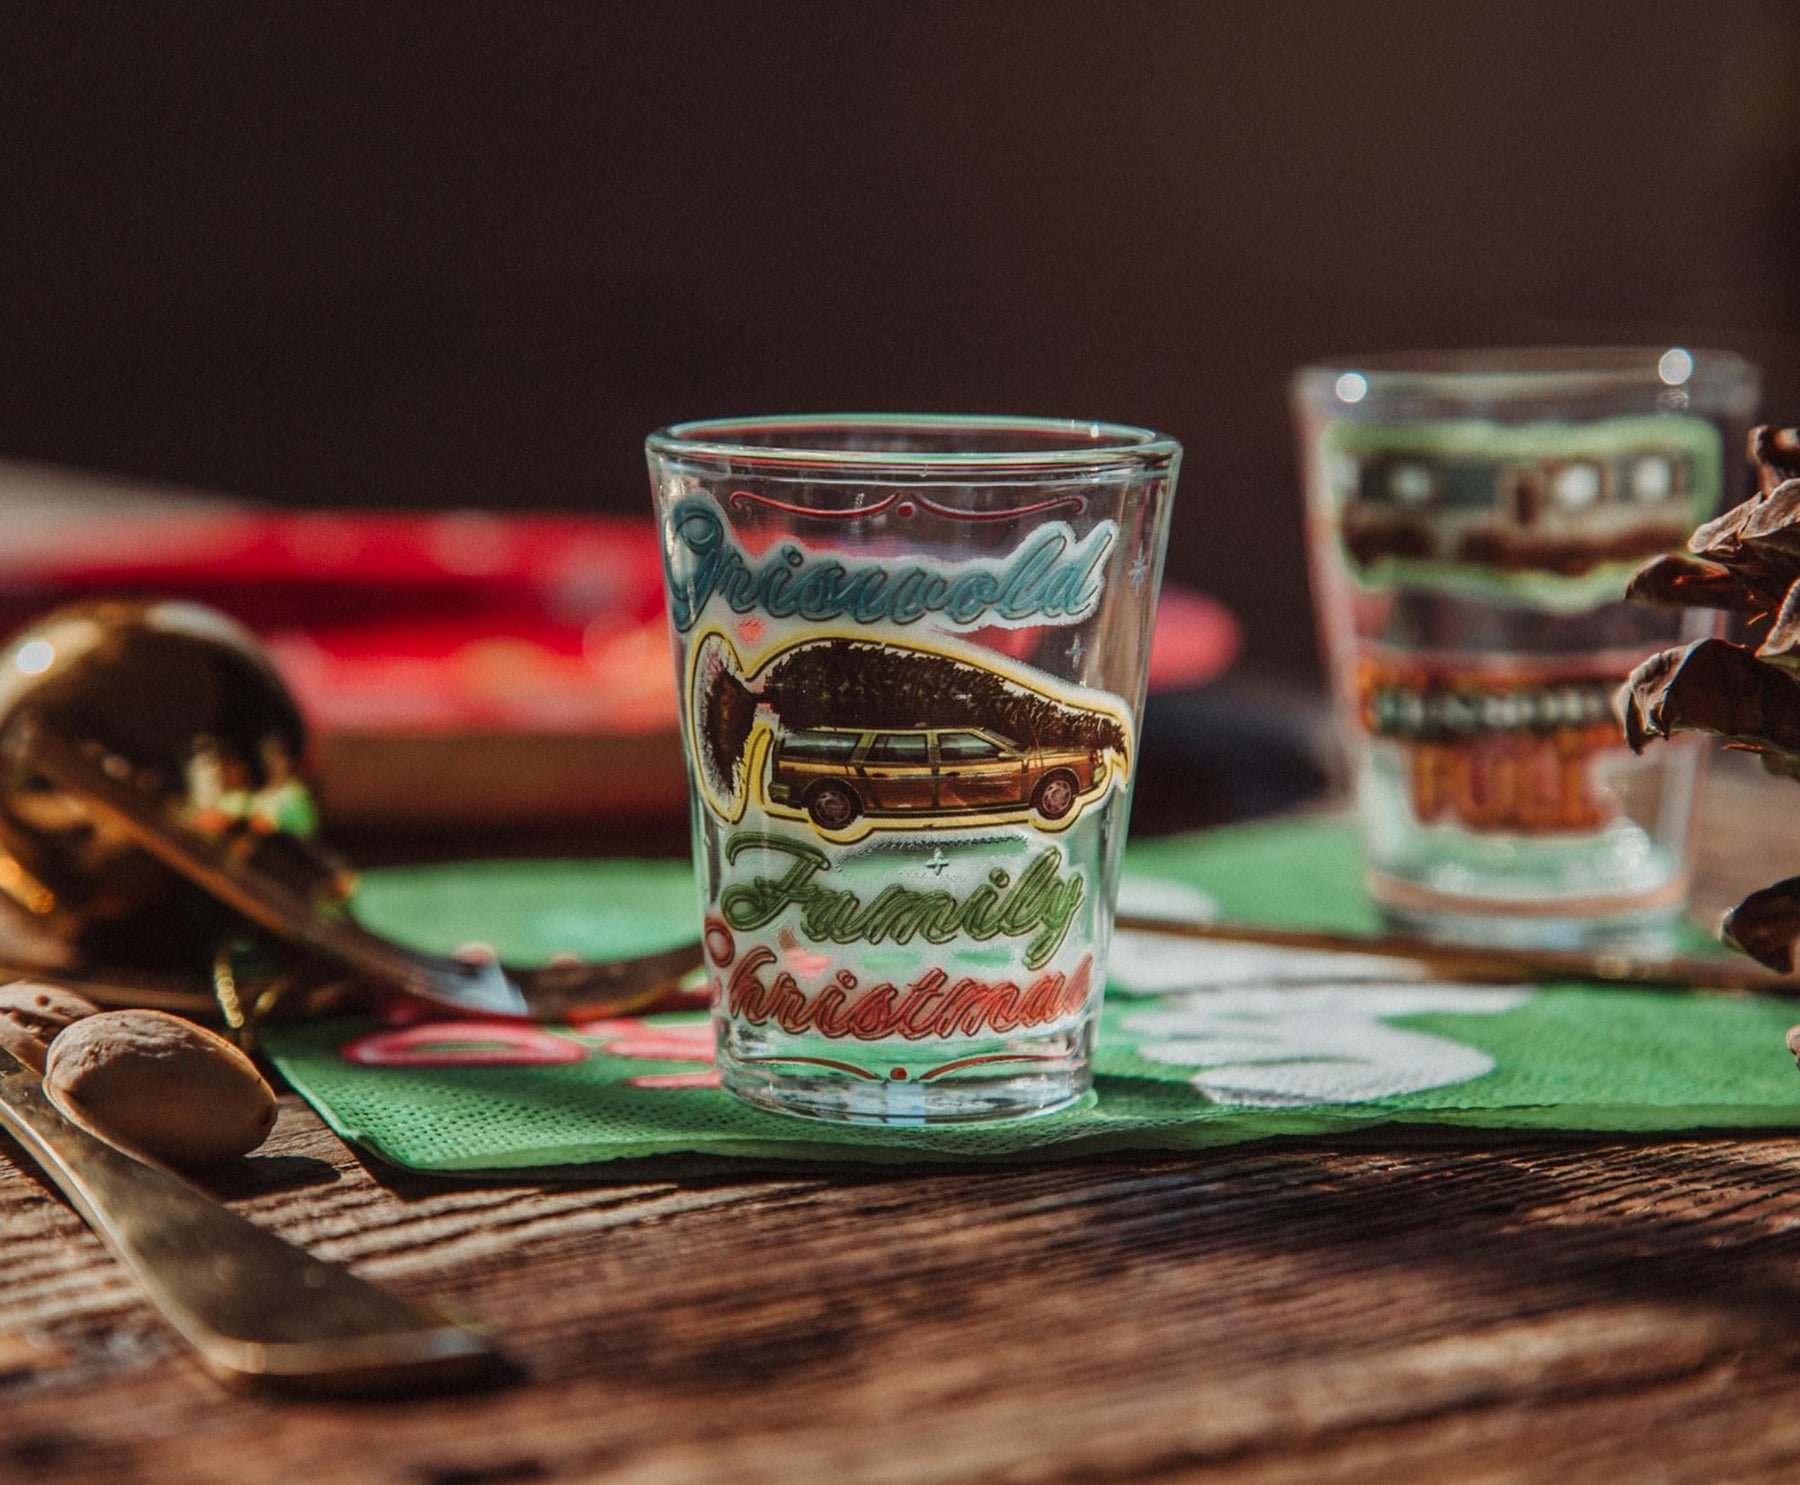 National Lampoon's Christmas Vacation Quotes Mini Shot Glasses | Set of 4